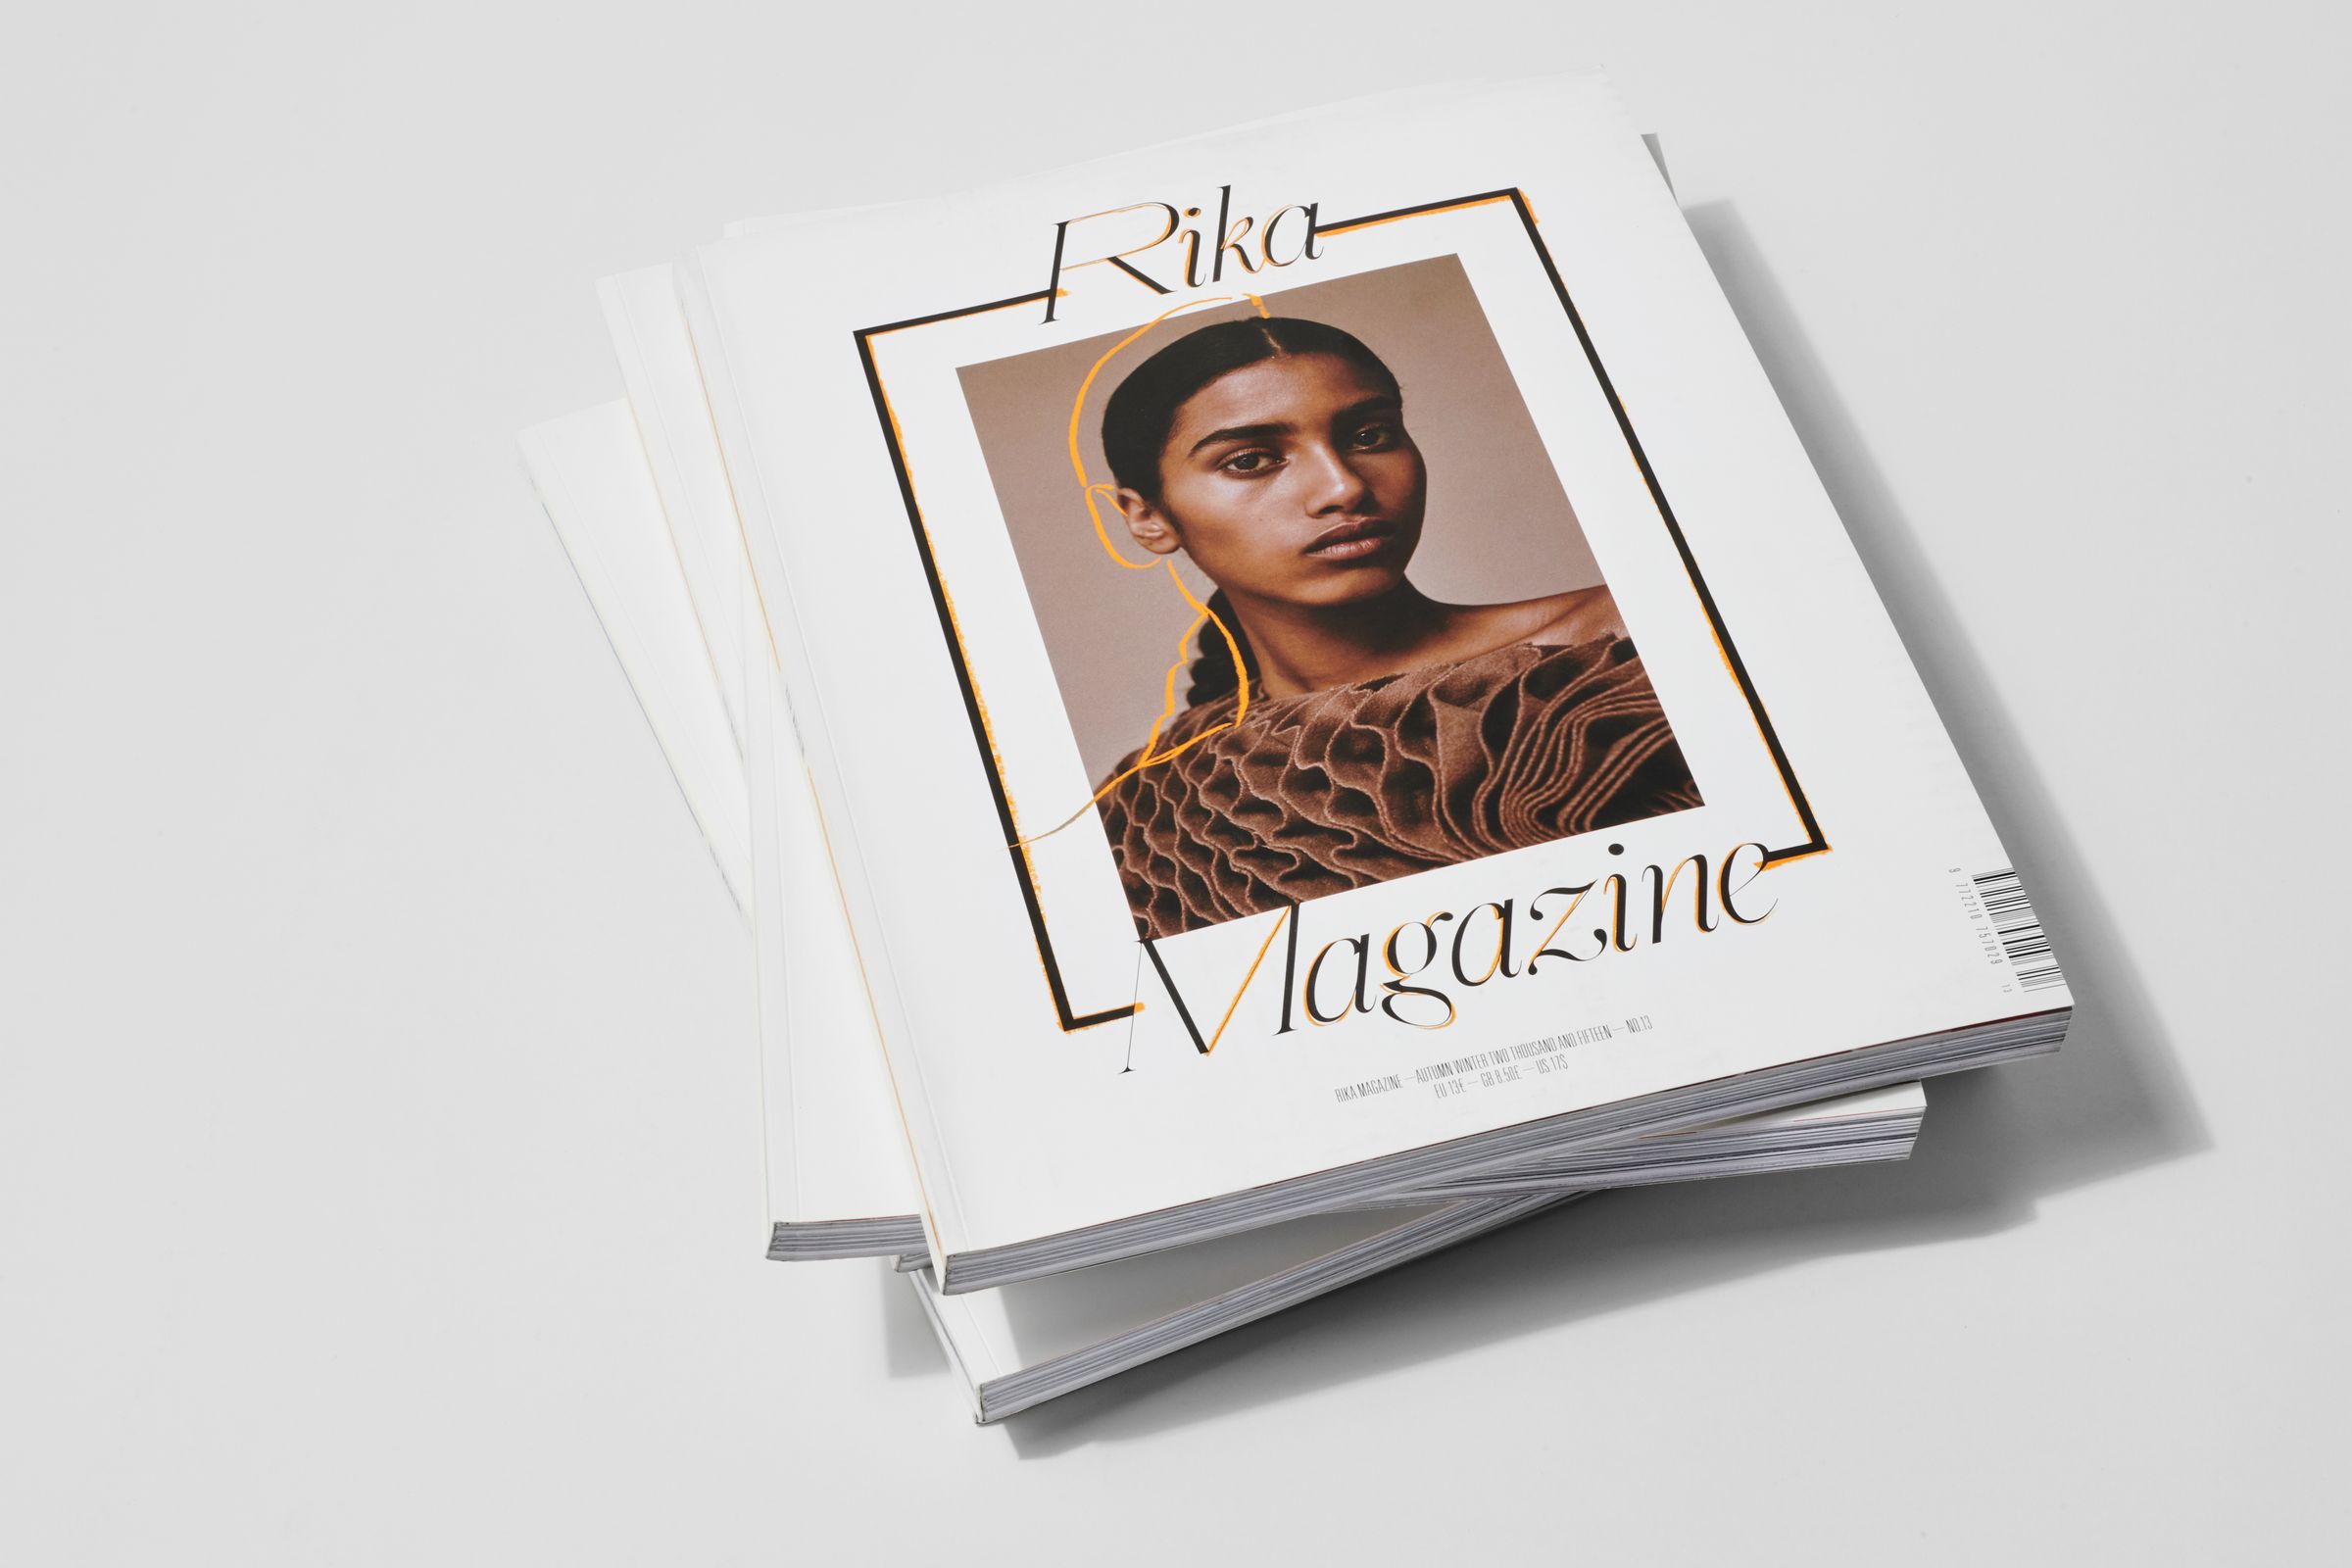 Rika Magazine issue no. 13 cover featuring Imaan Hammam photographed by Charlotte Wales